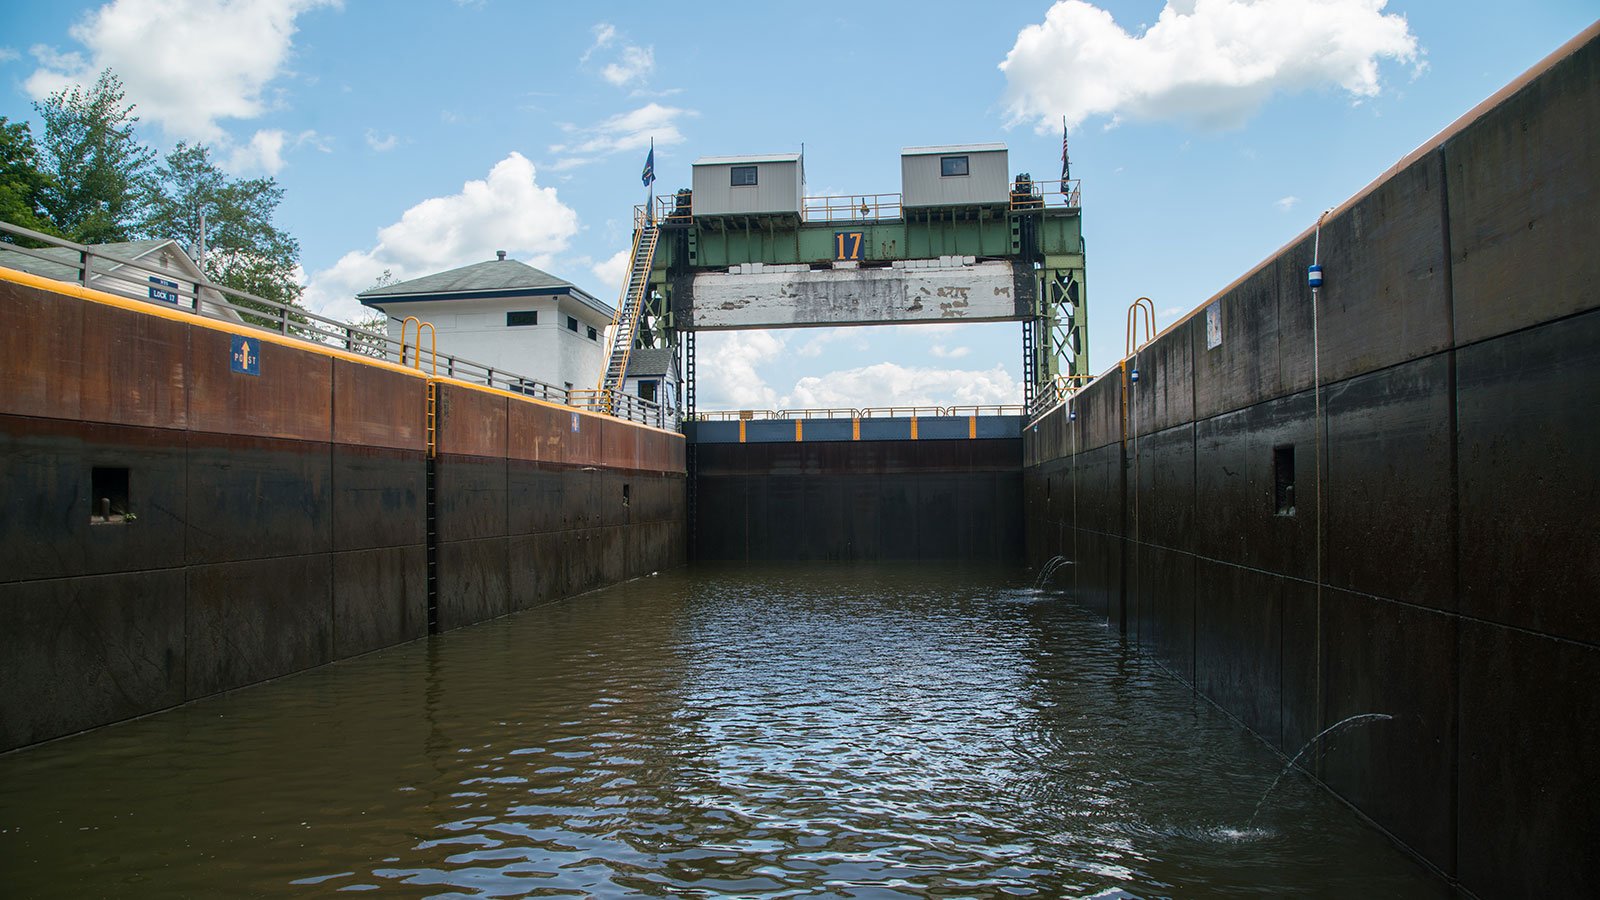 Lock 17 along the Erie Canal in Little Falls, New York, in 2017